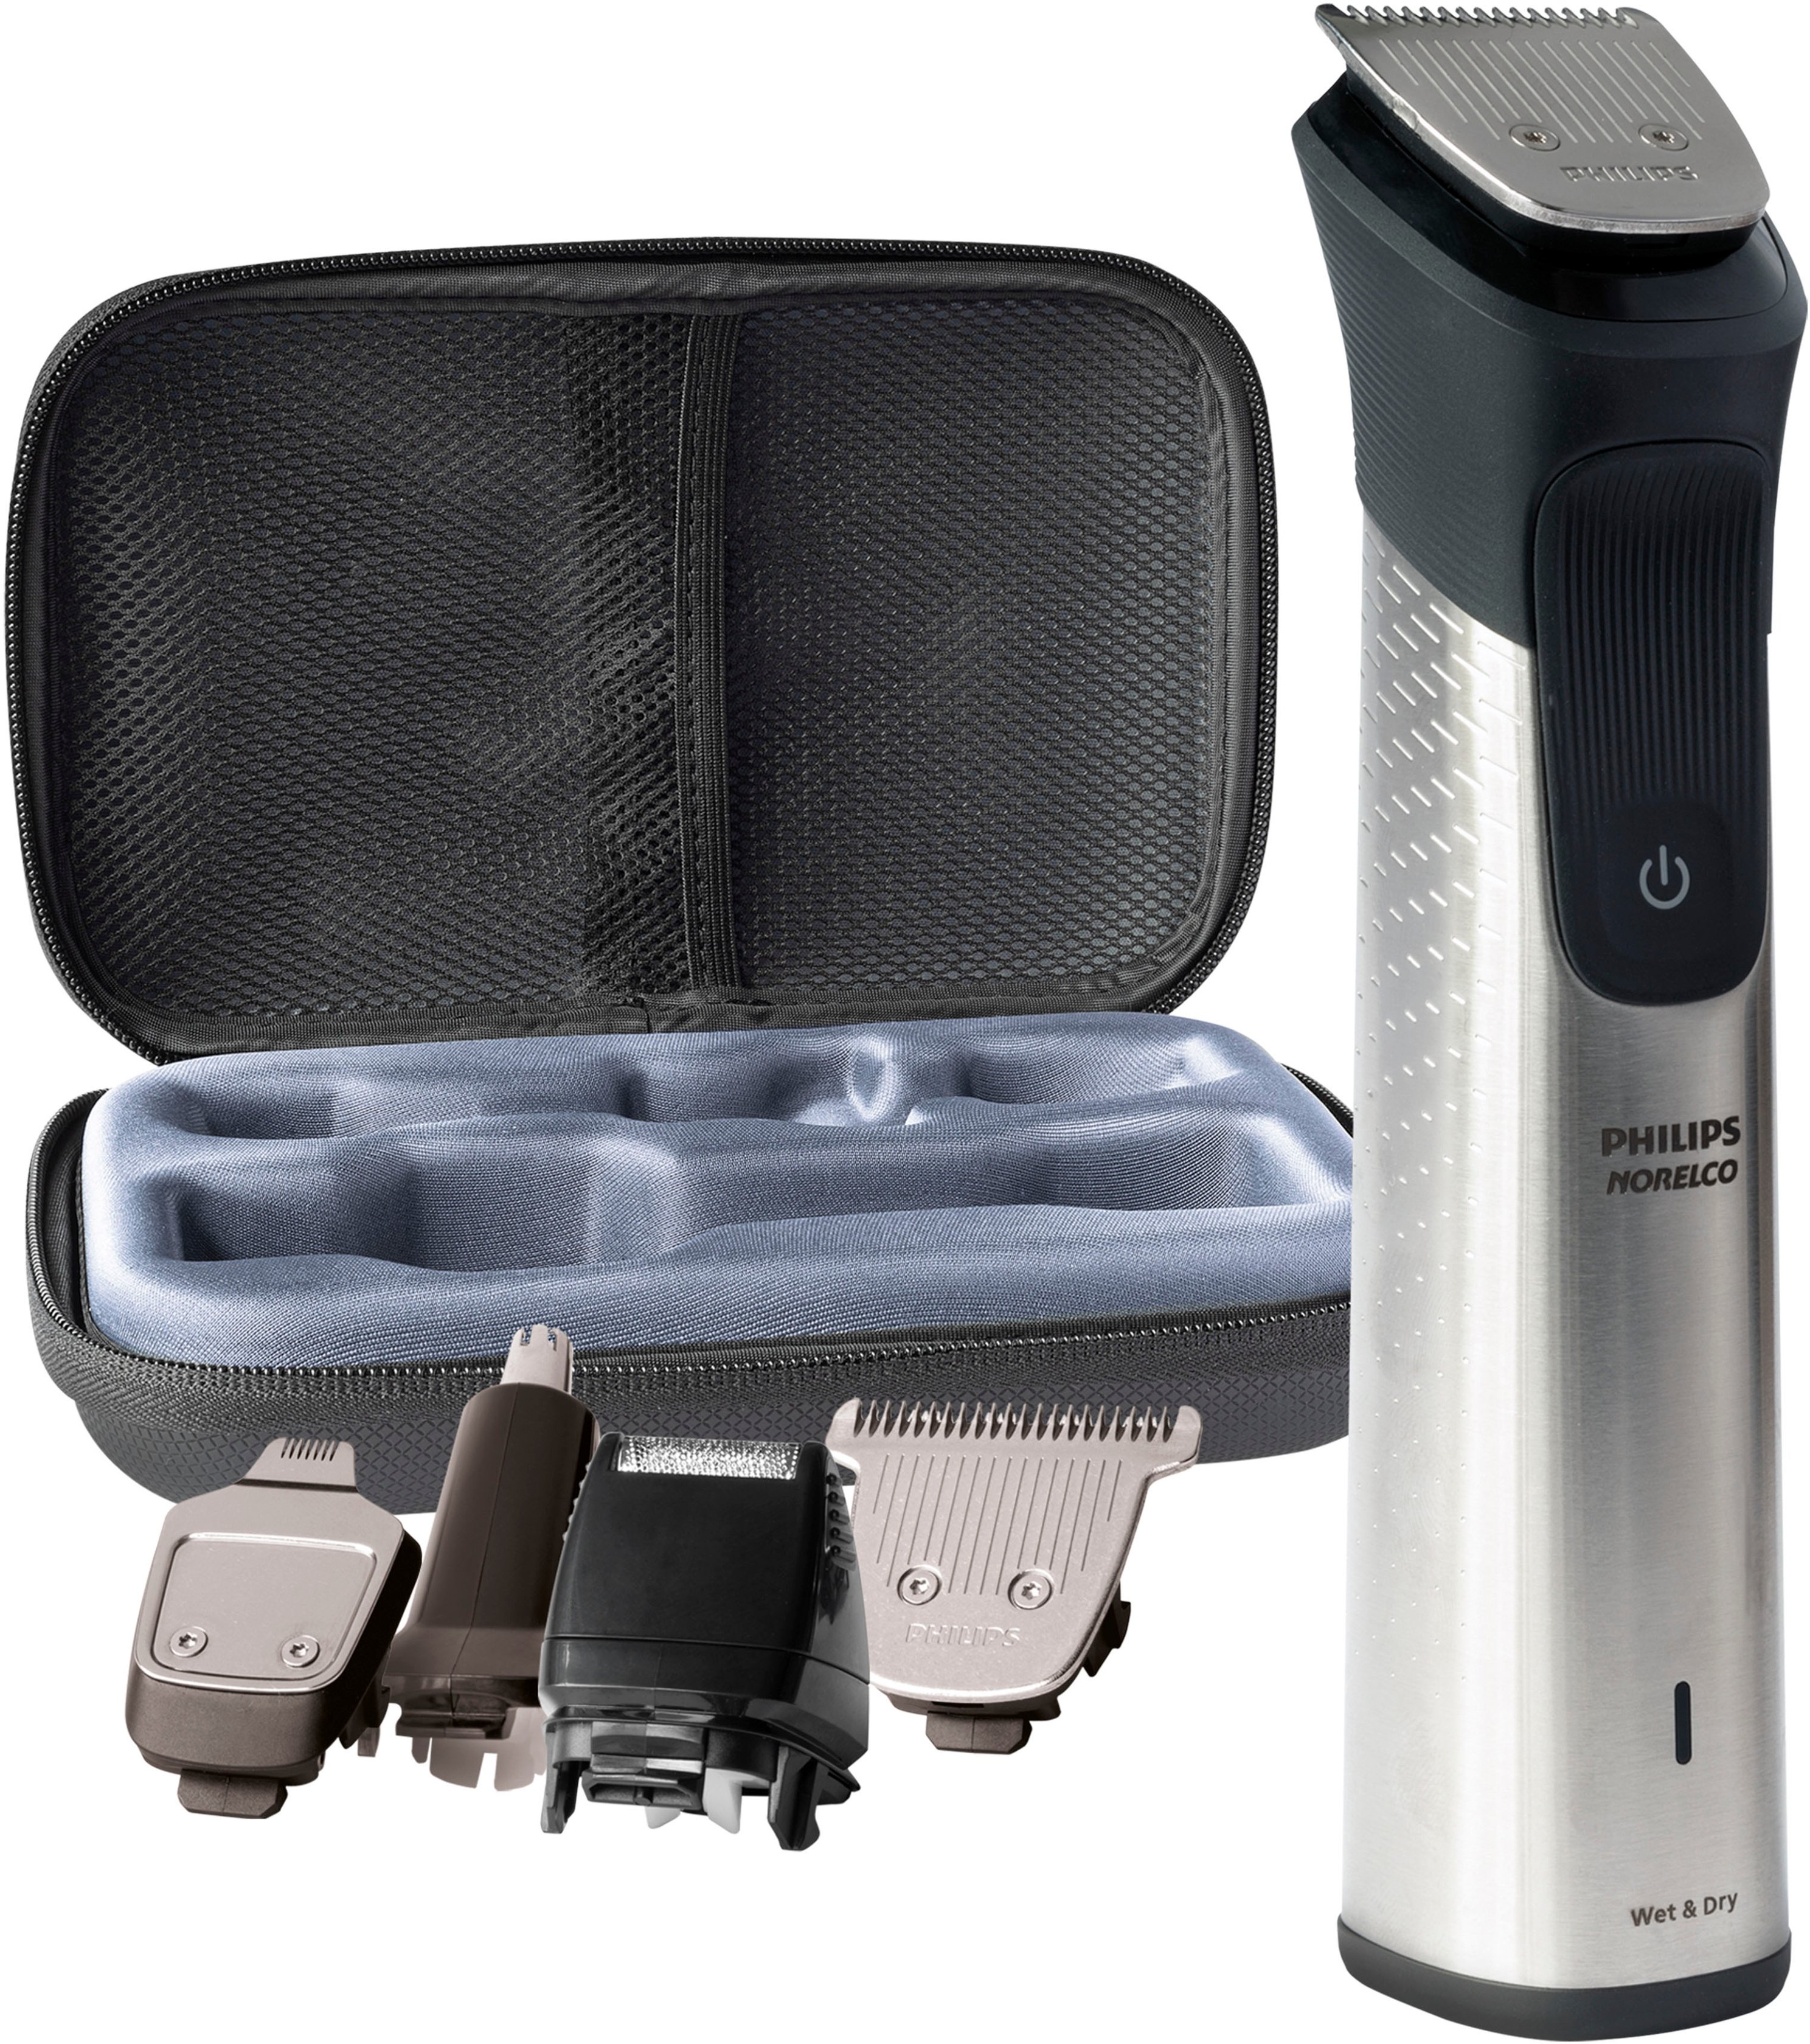 Philips Norelco Multigroom 9000 Prestige All-in-One Trimmer MG9730/40 New  75020086730